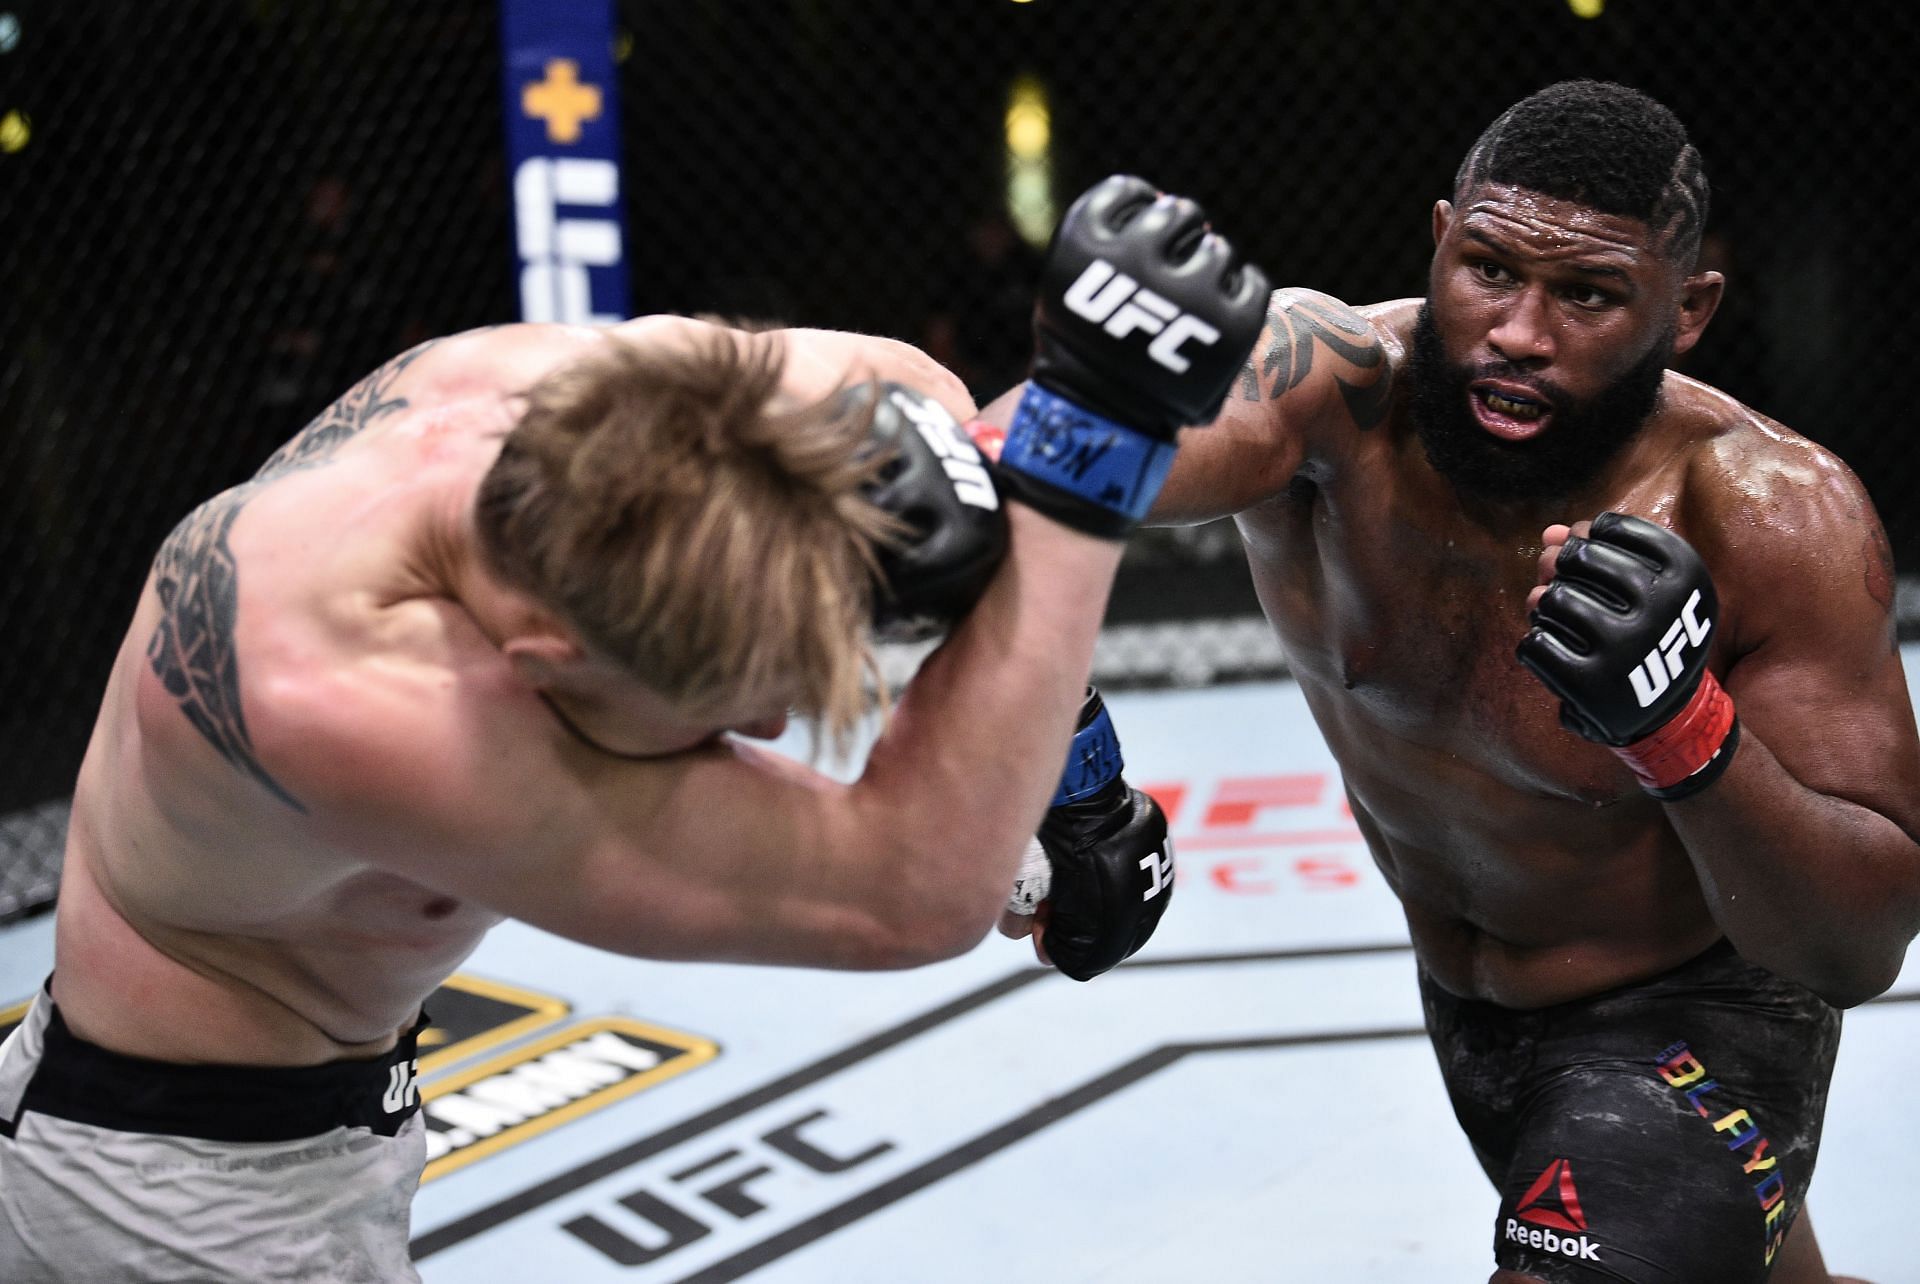 Curtis Blaydes is still the most dominant wrestler in the heavyweight division